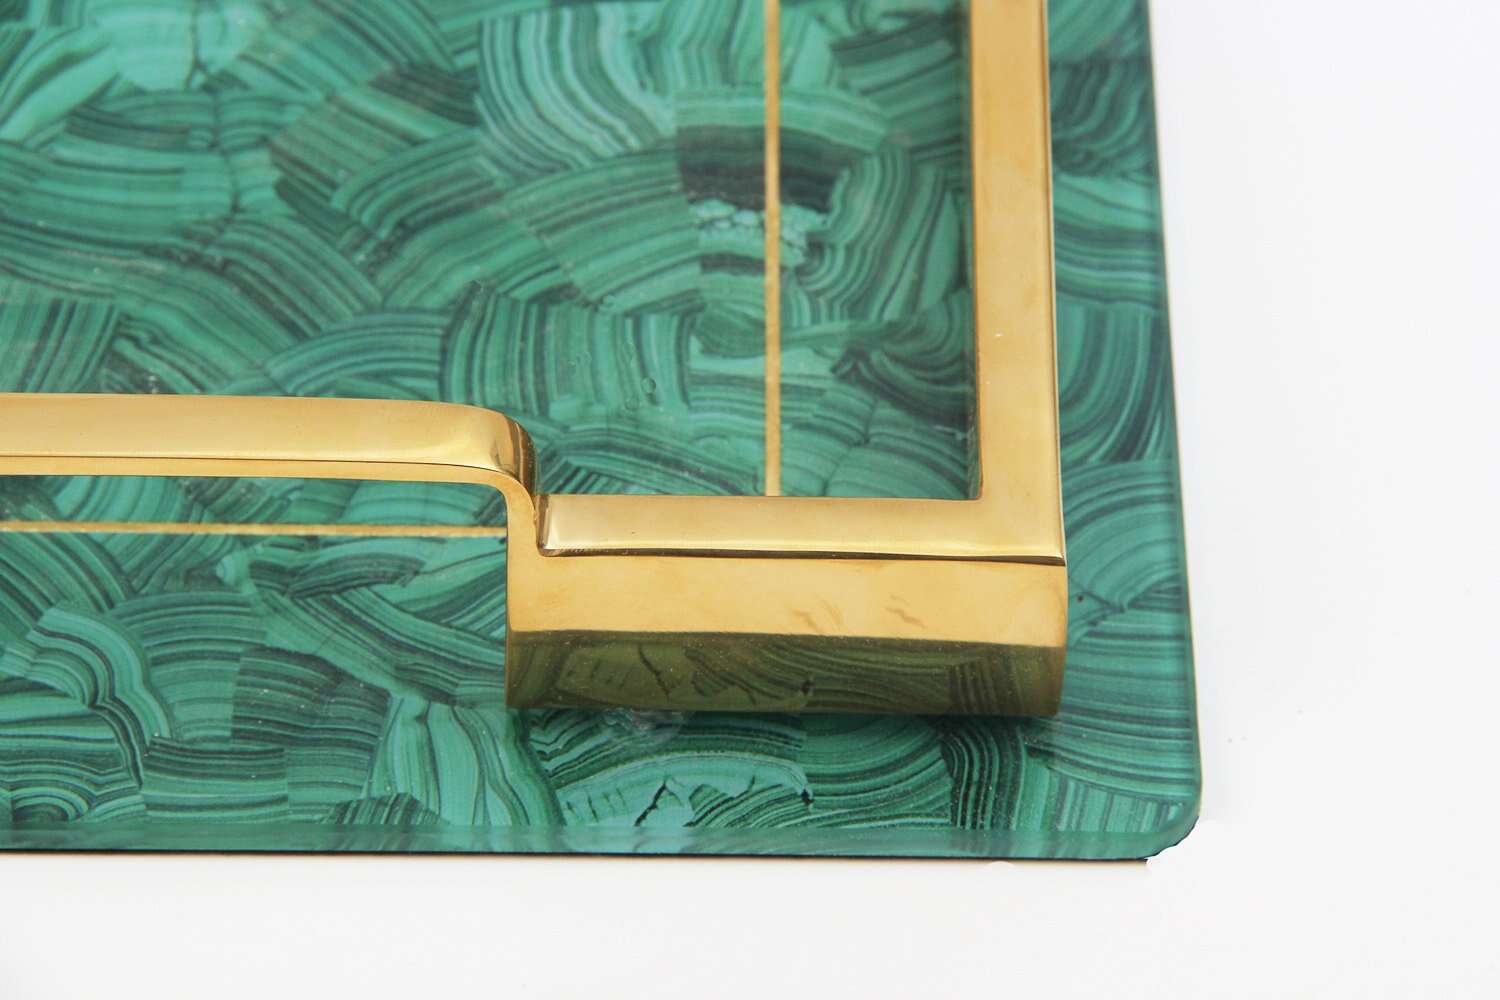 Special drinks tray in malachite & gold serving tray